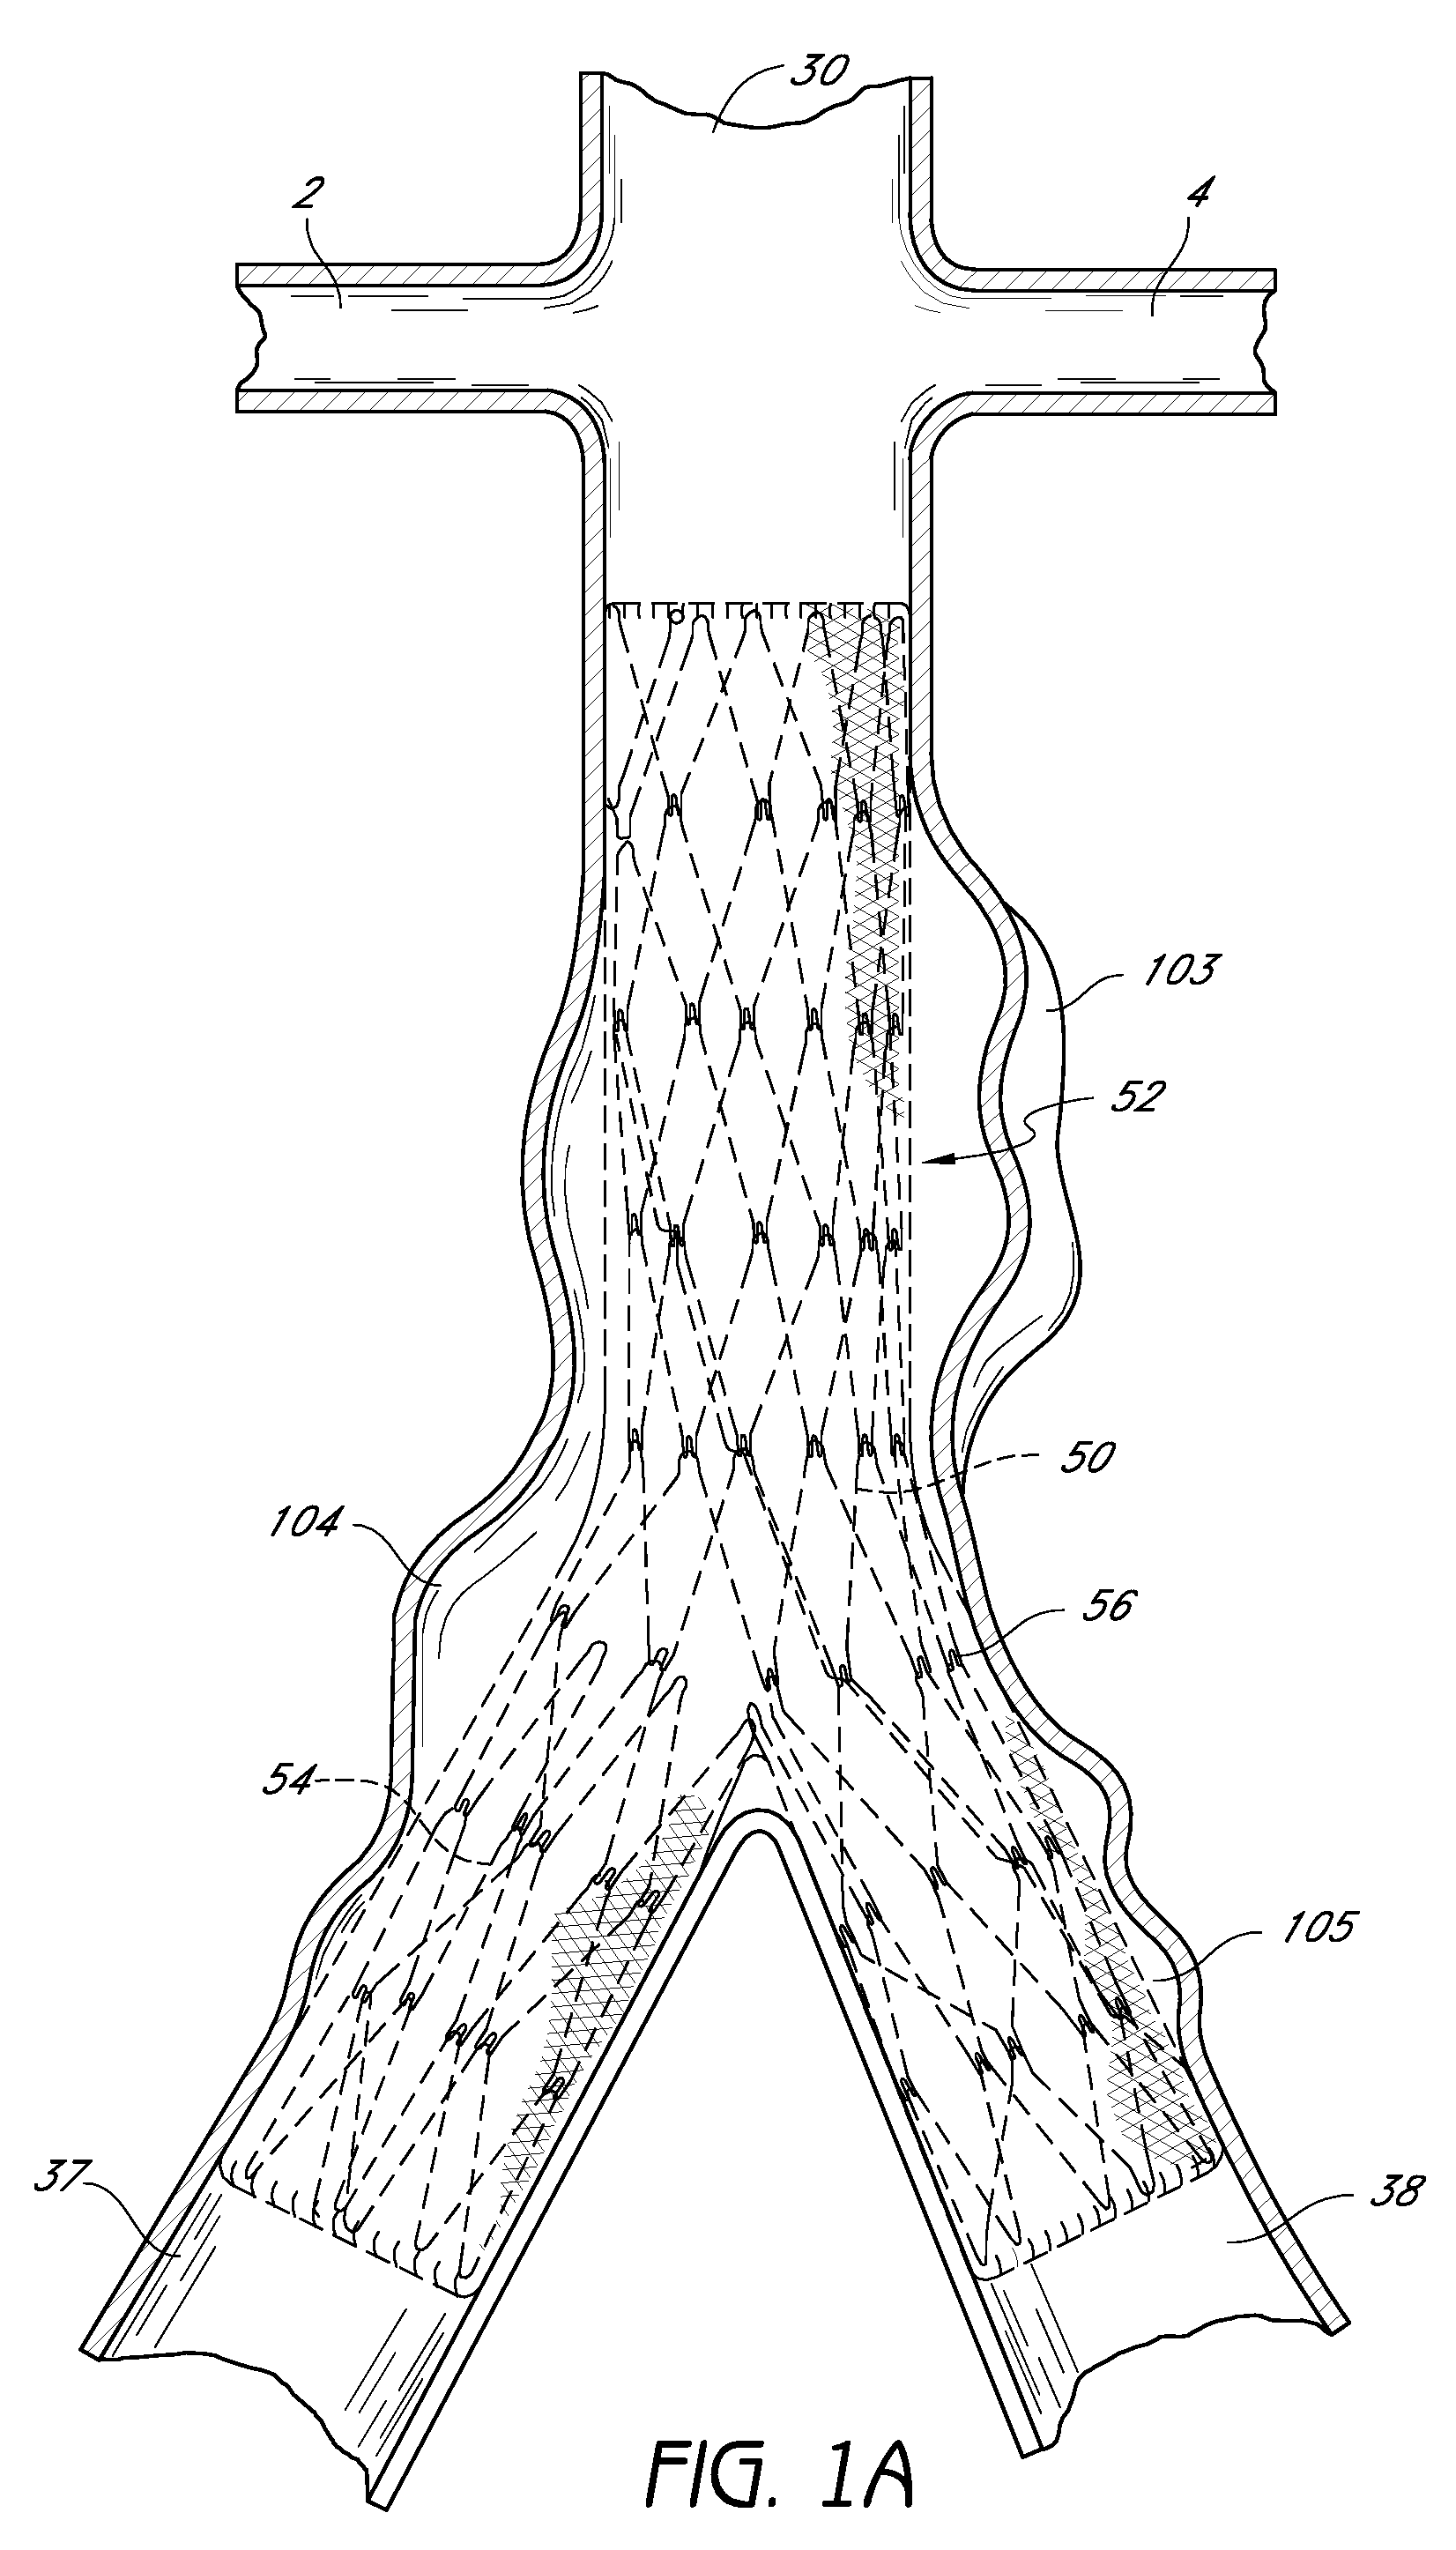 Bifurcated graft deployment systems and methods